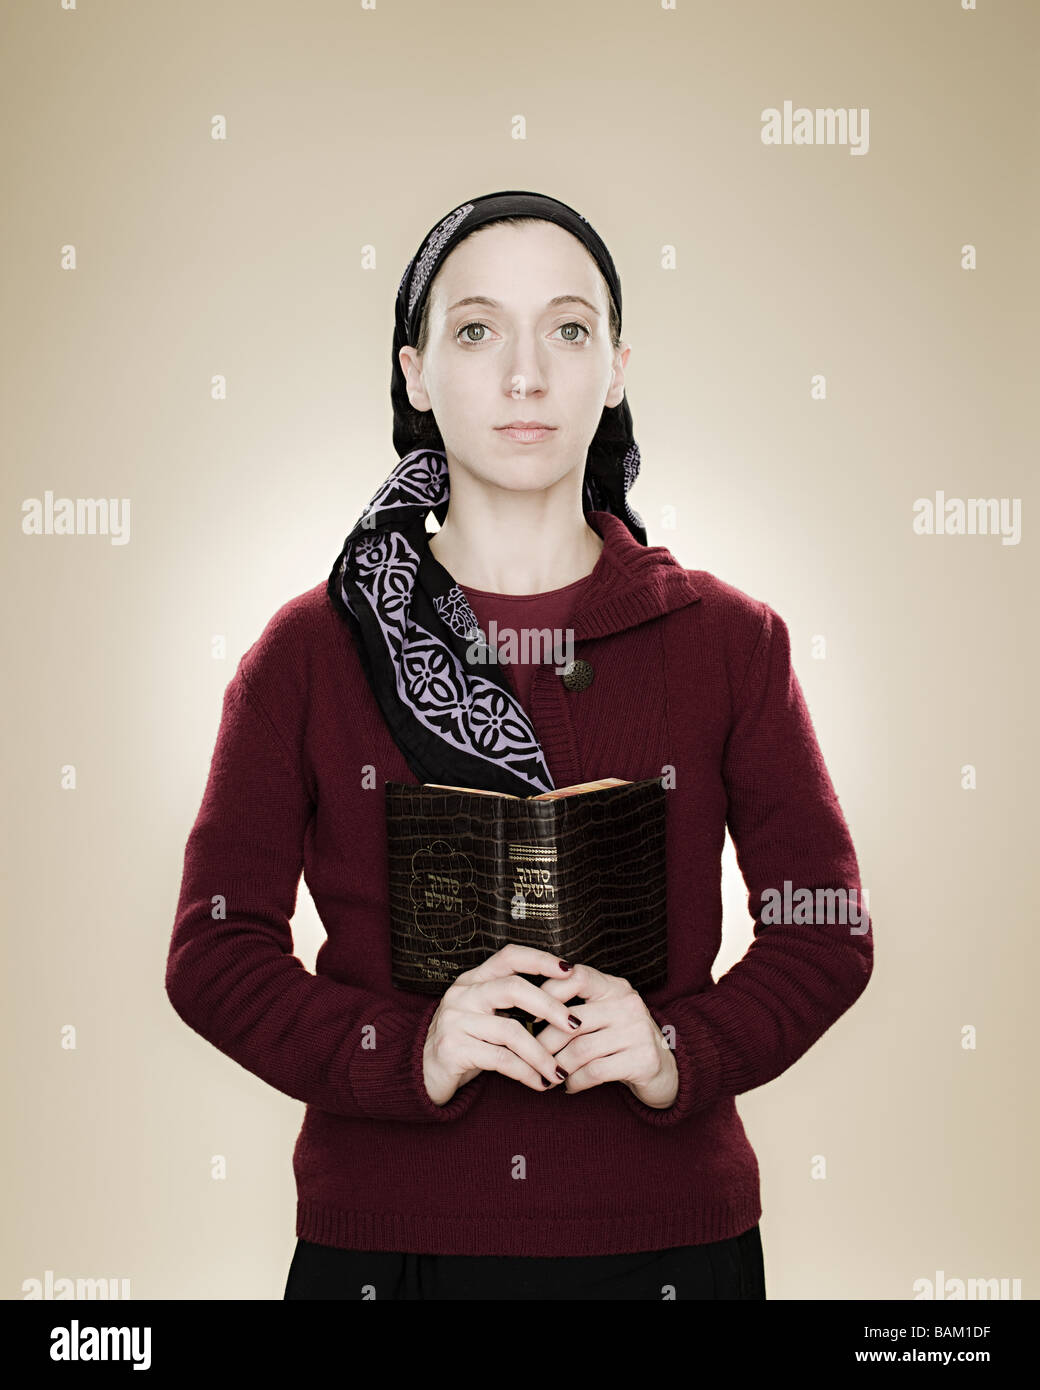 Portrait of a young jewish woman holding a prayer book Stock Photo